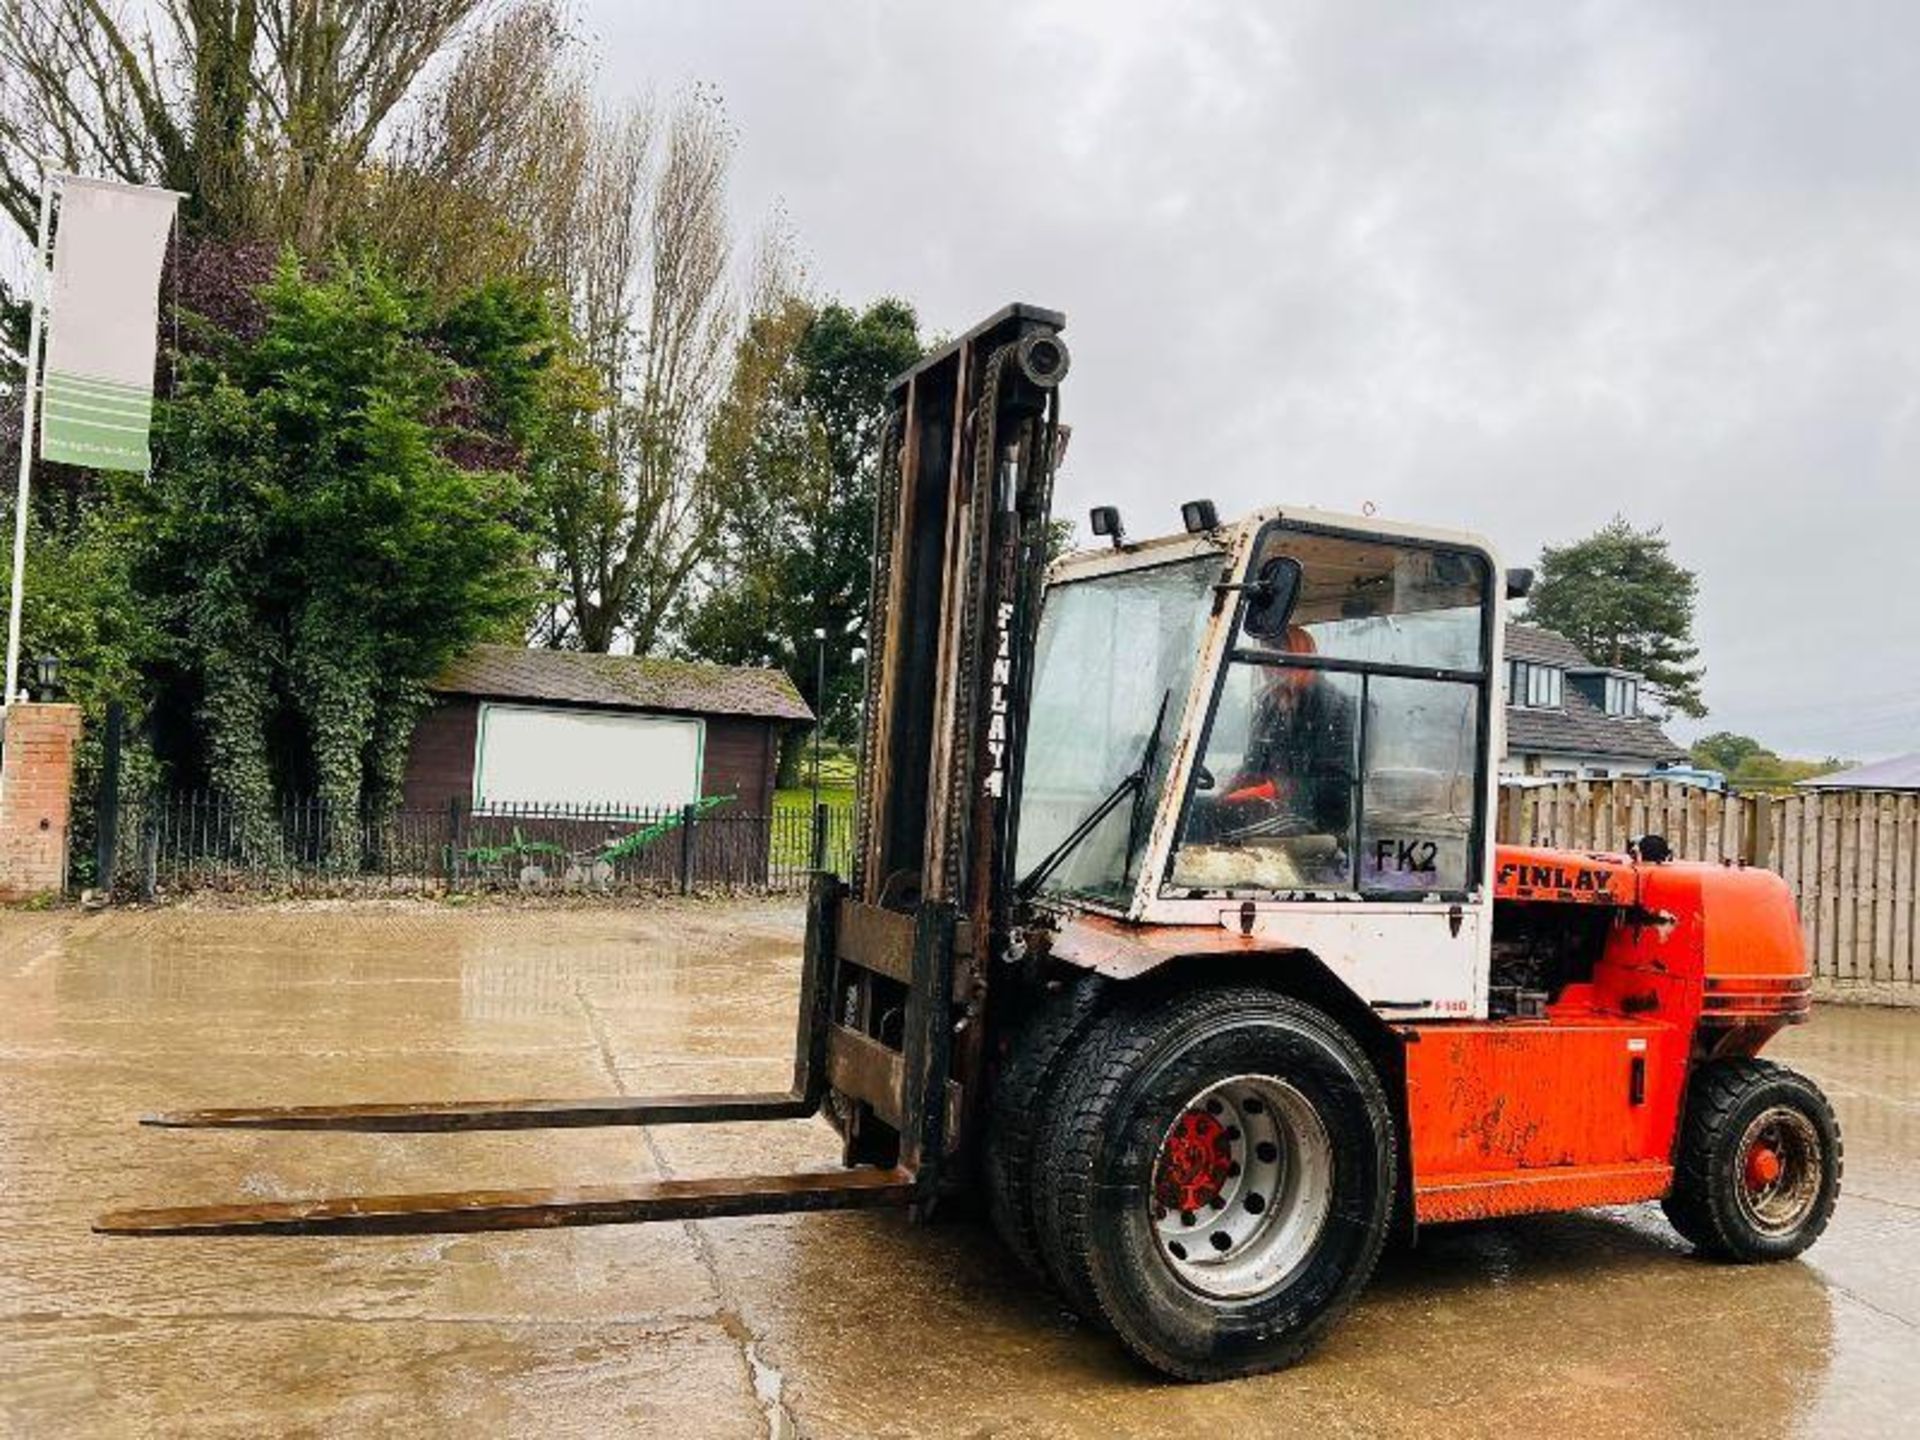 FINLAY F140 ROUGH FORKLIFT C/W 2M LONG TINES & 3 X AUXILARY LINES  - Image 2 of 11